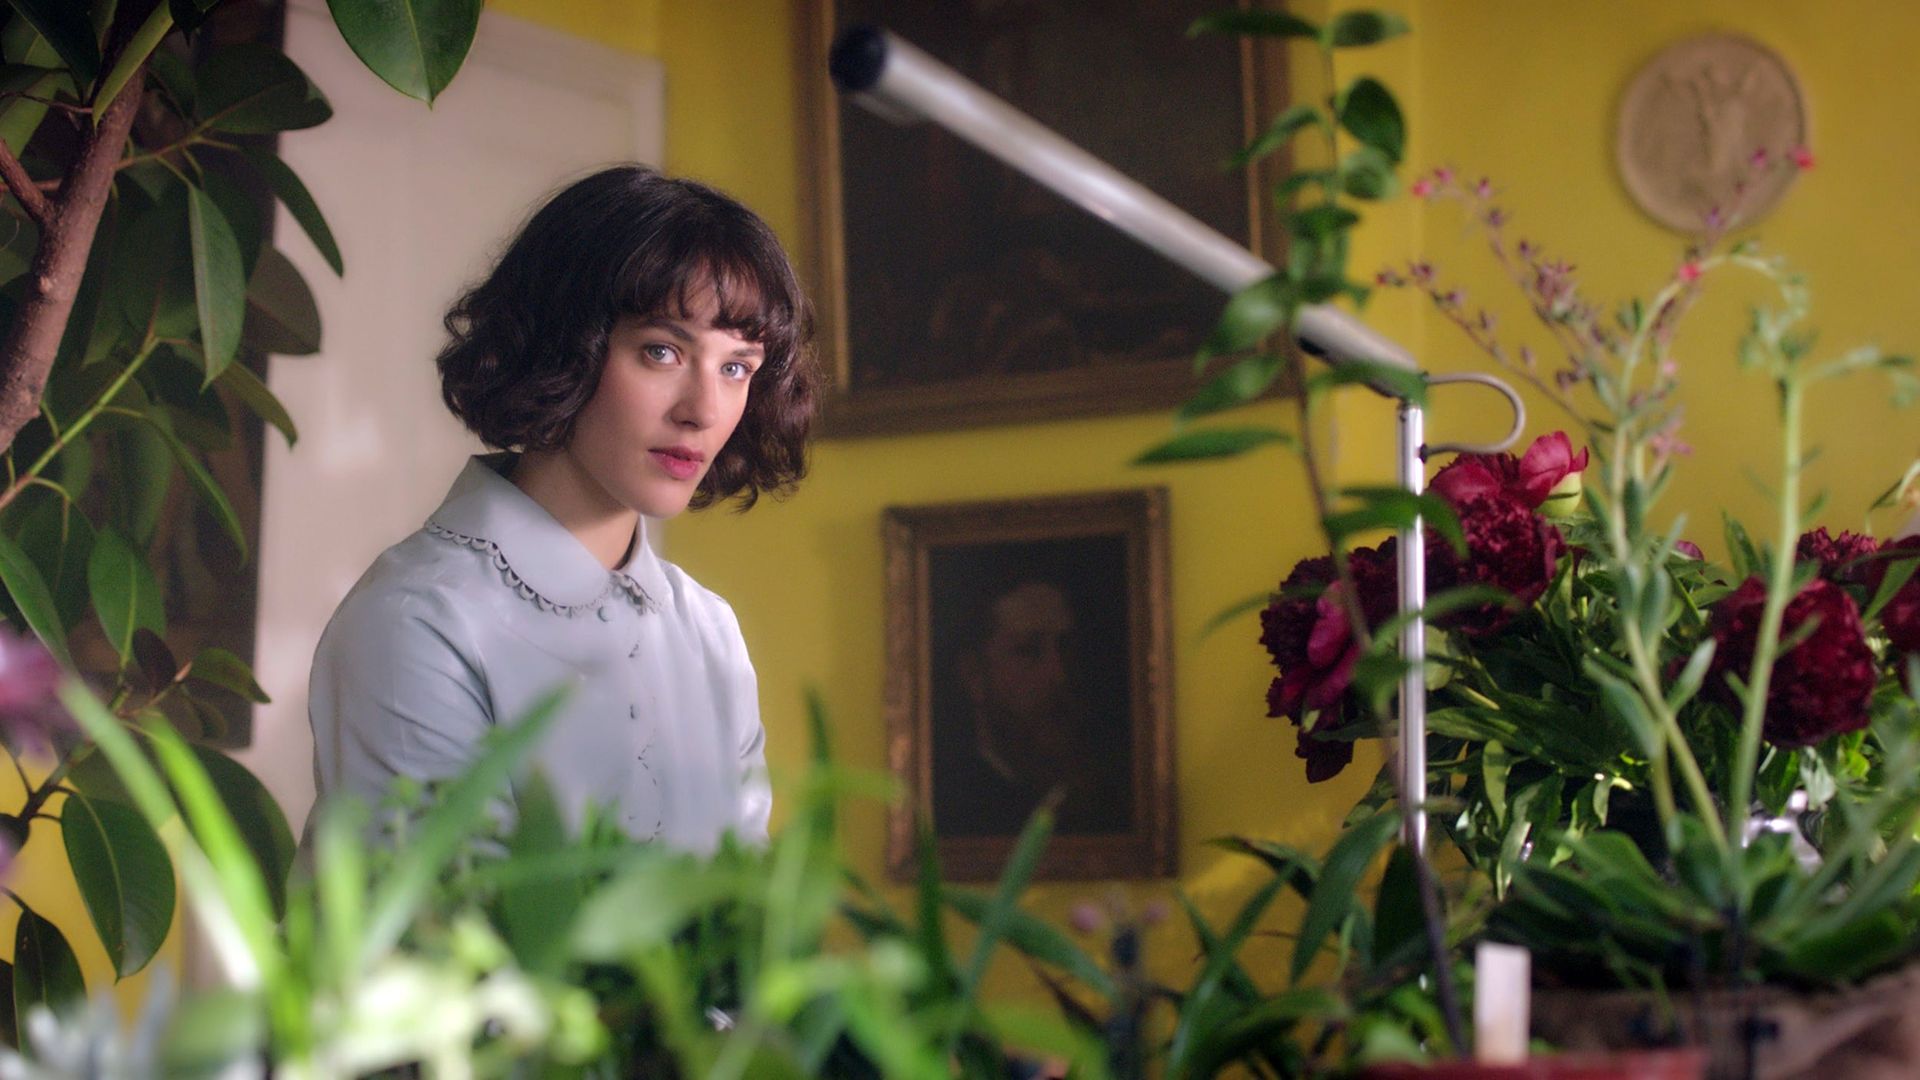 This Beautiful Fantastic background